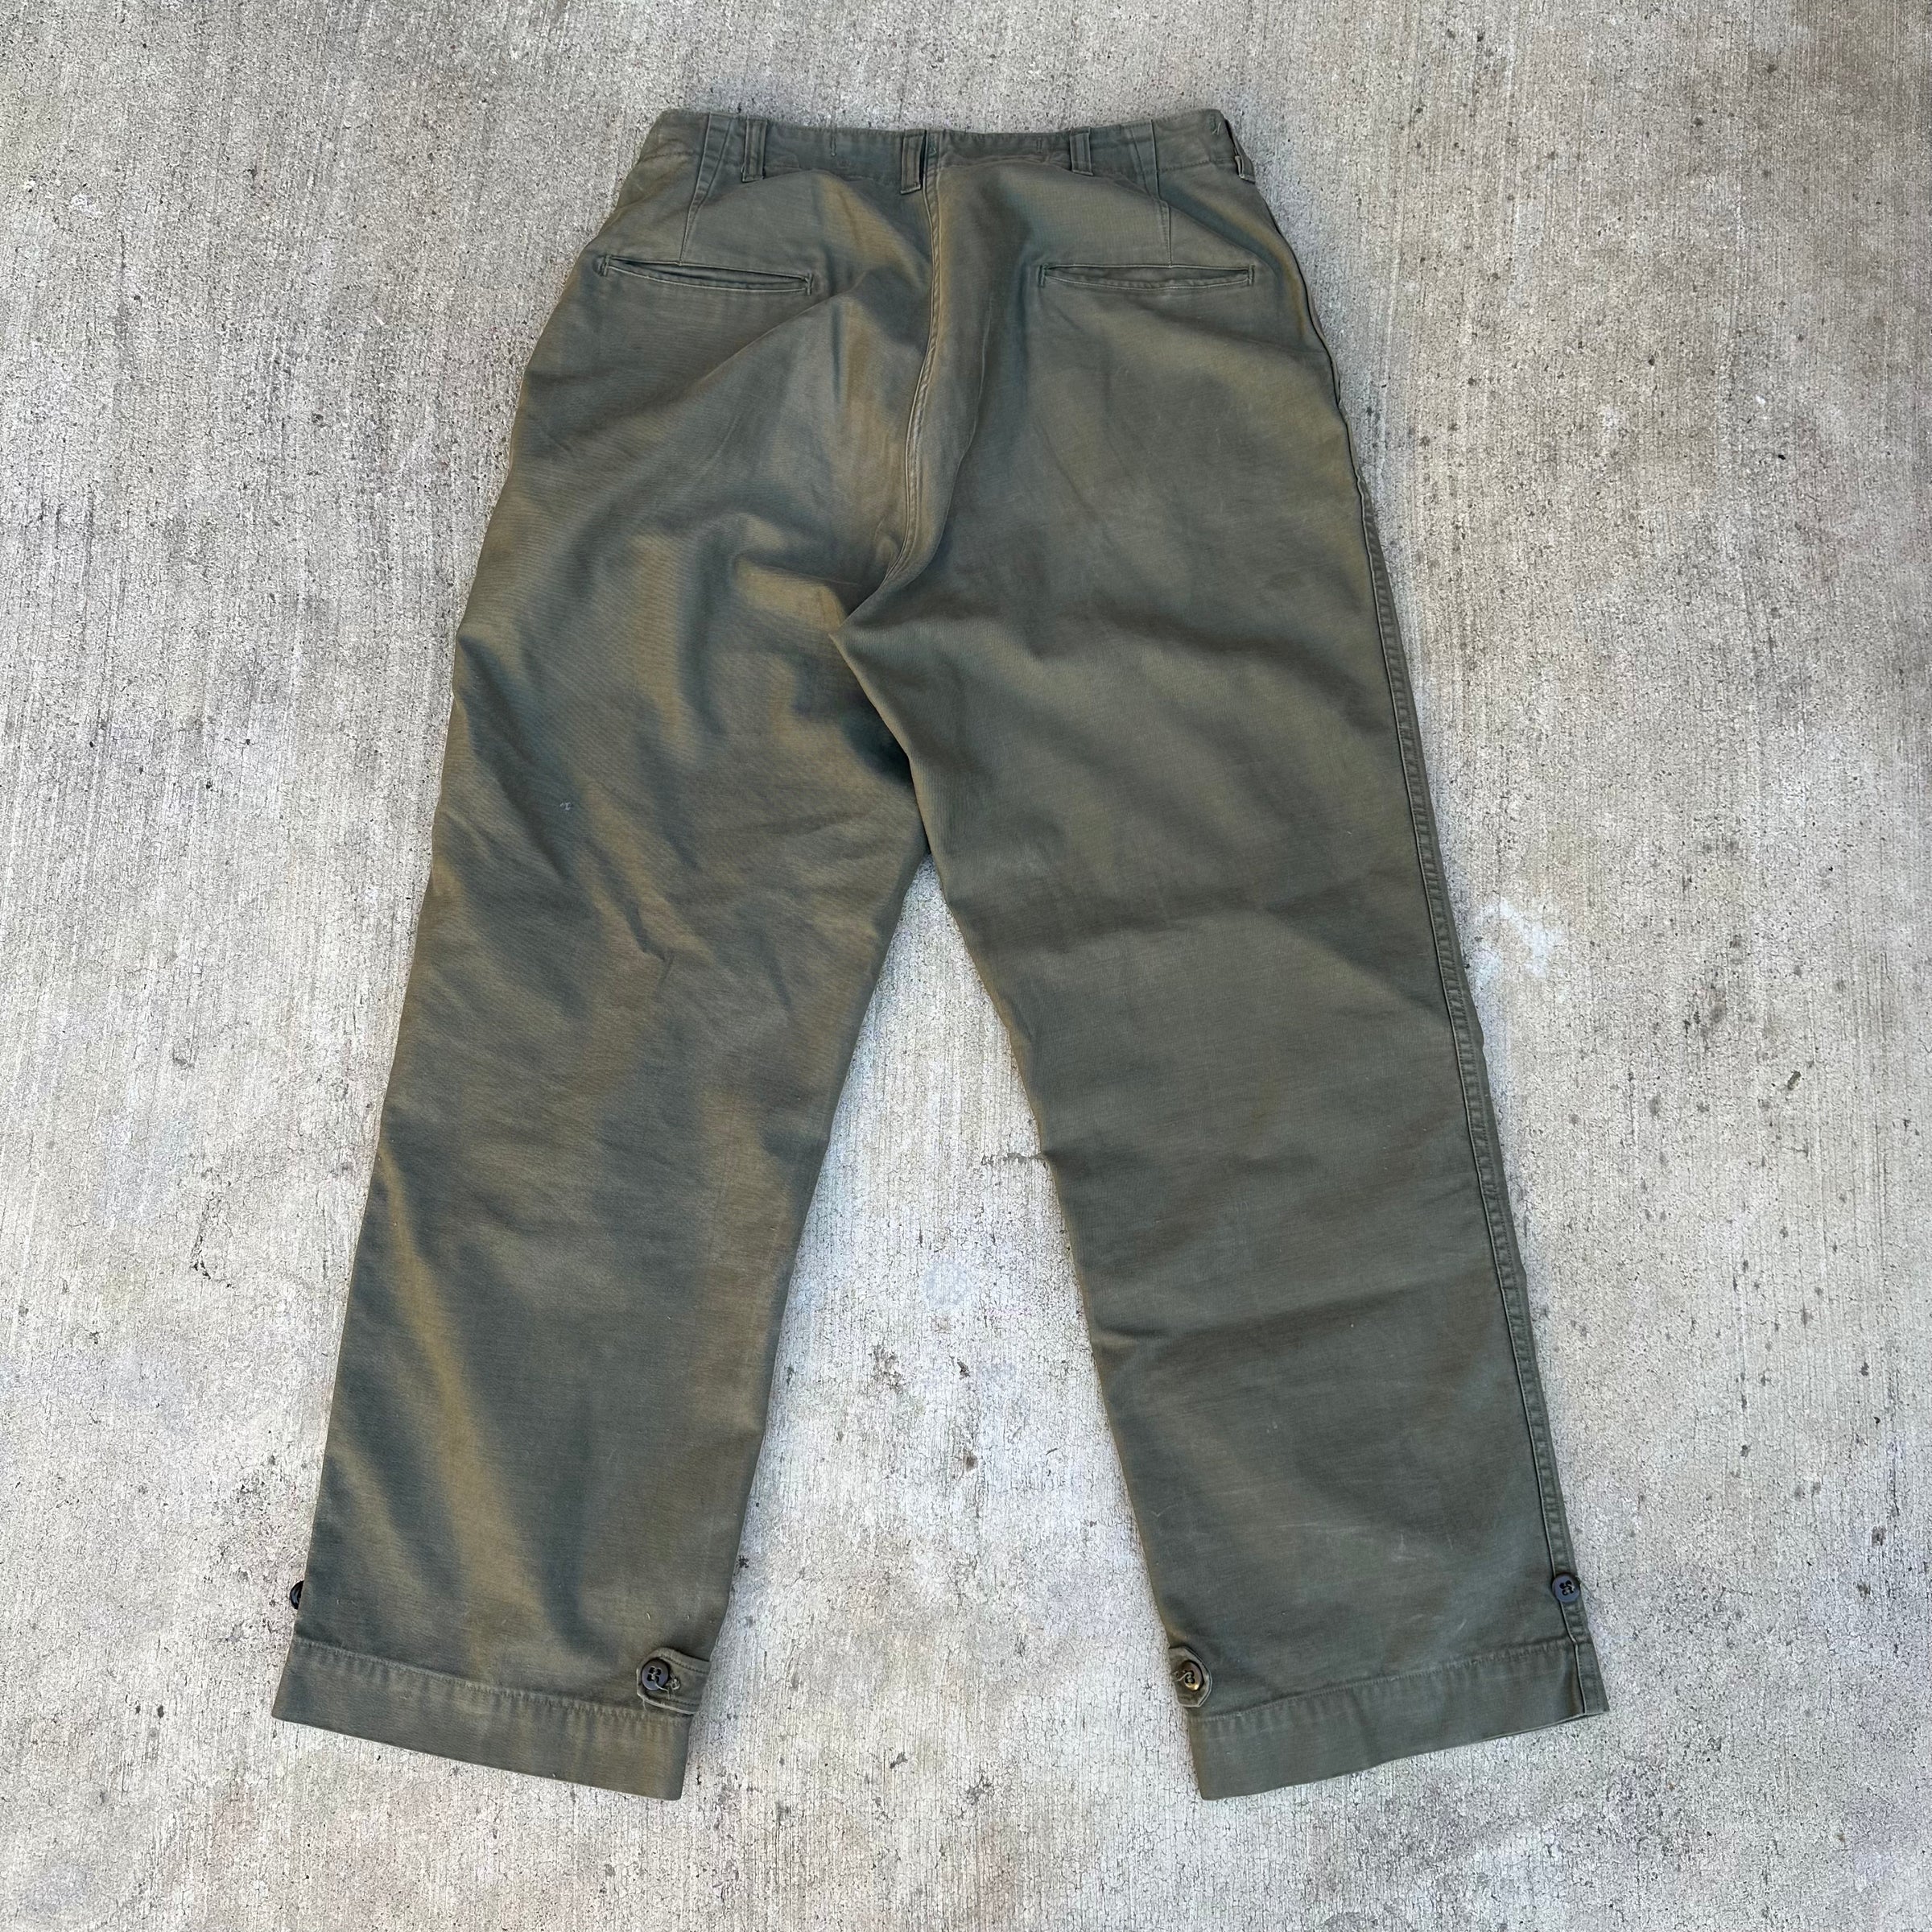 1940's WWII M-43 OD Cotton Field Trousers 33” - 34” x 30”